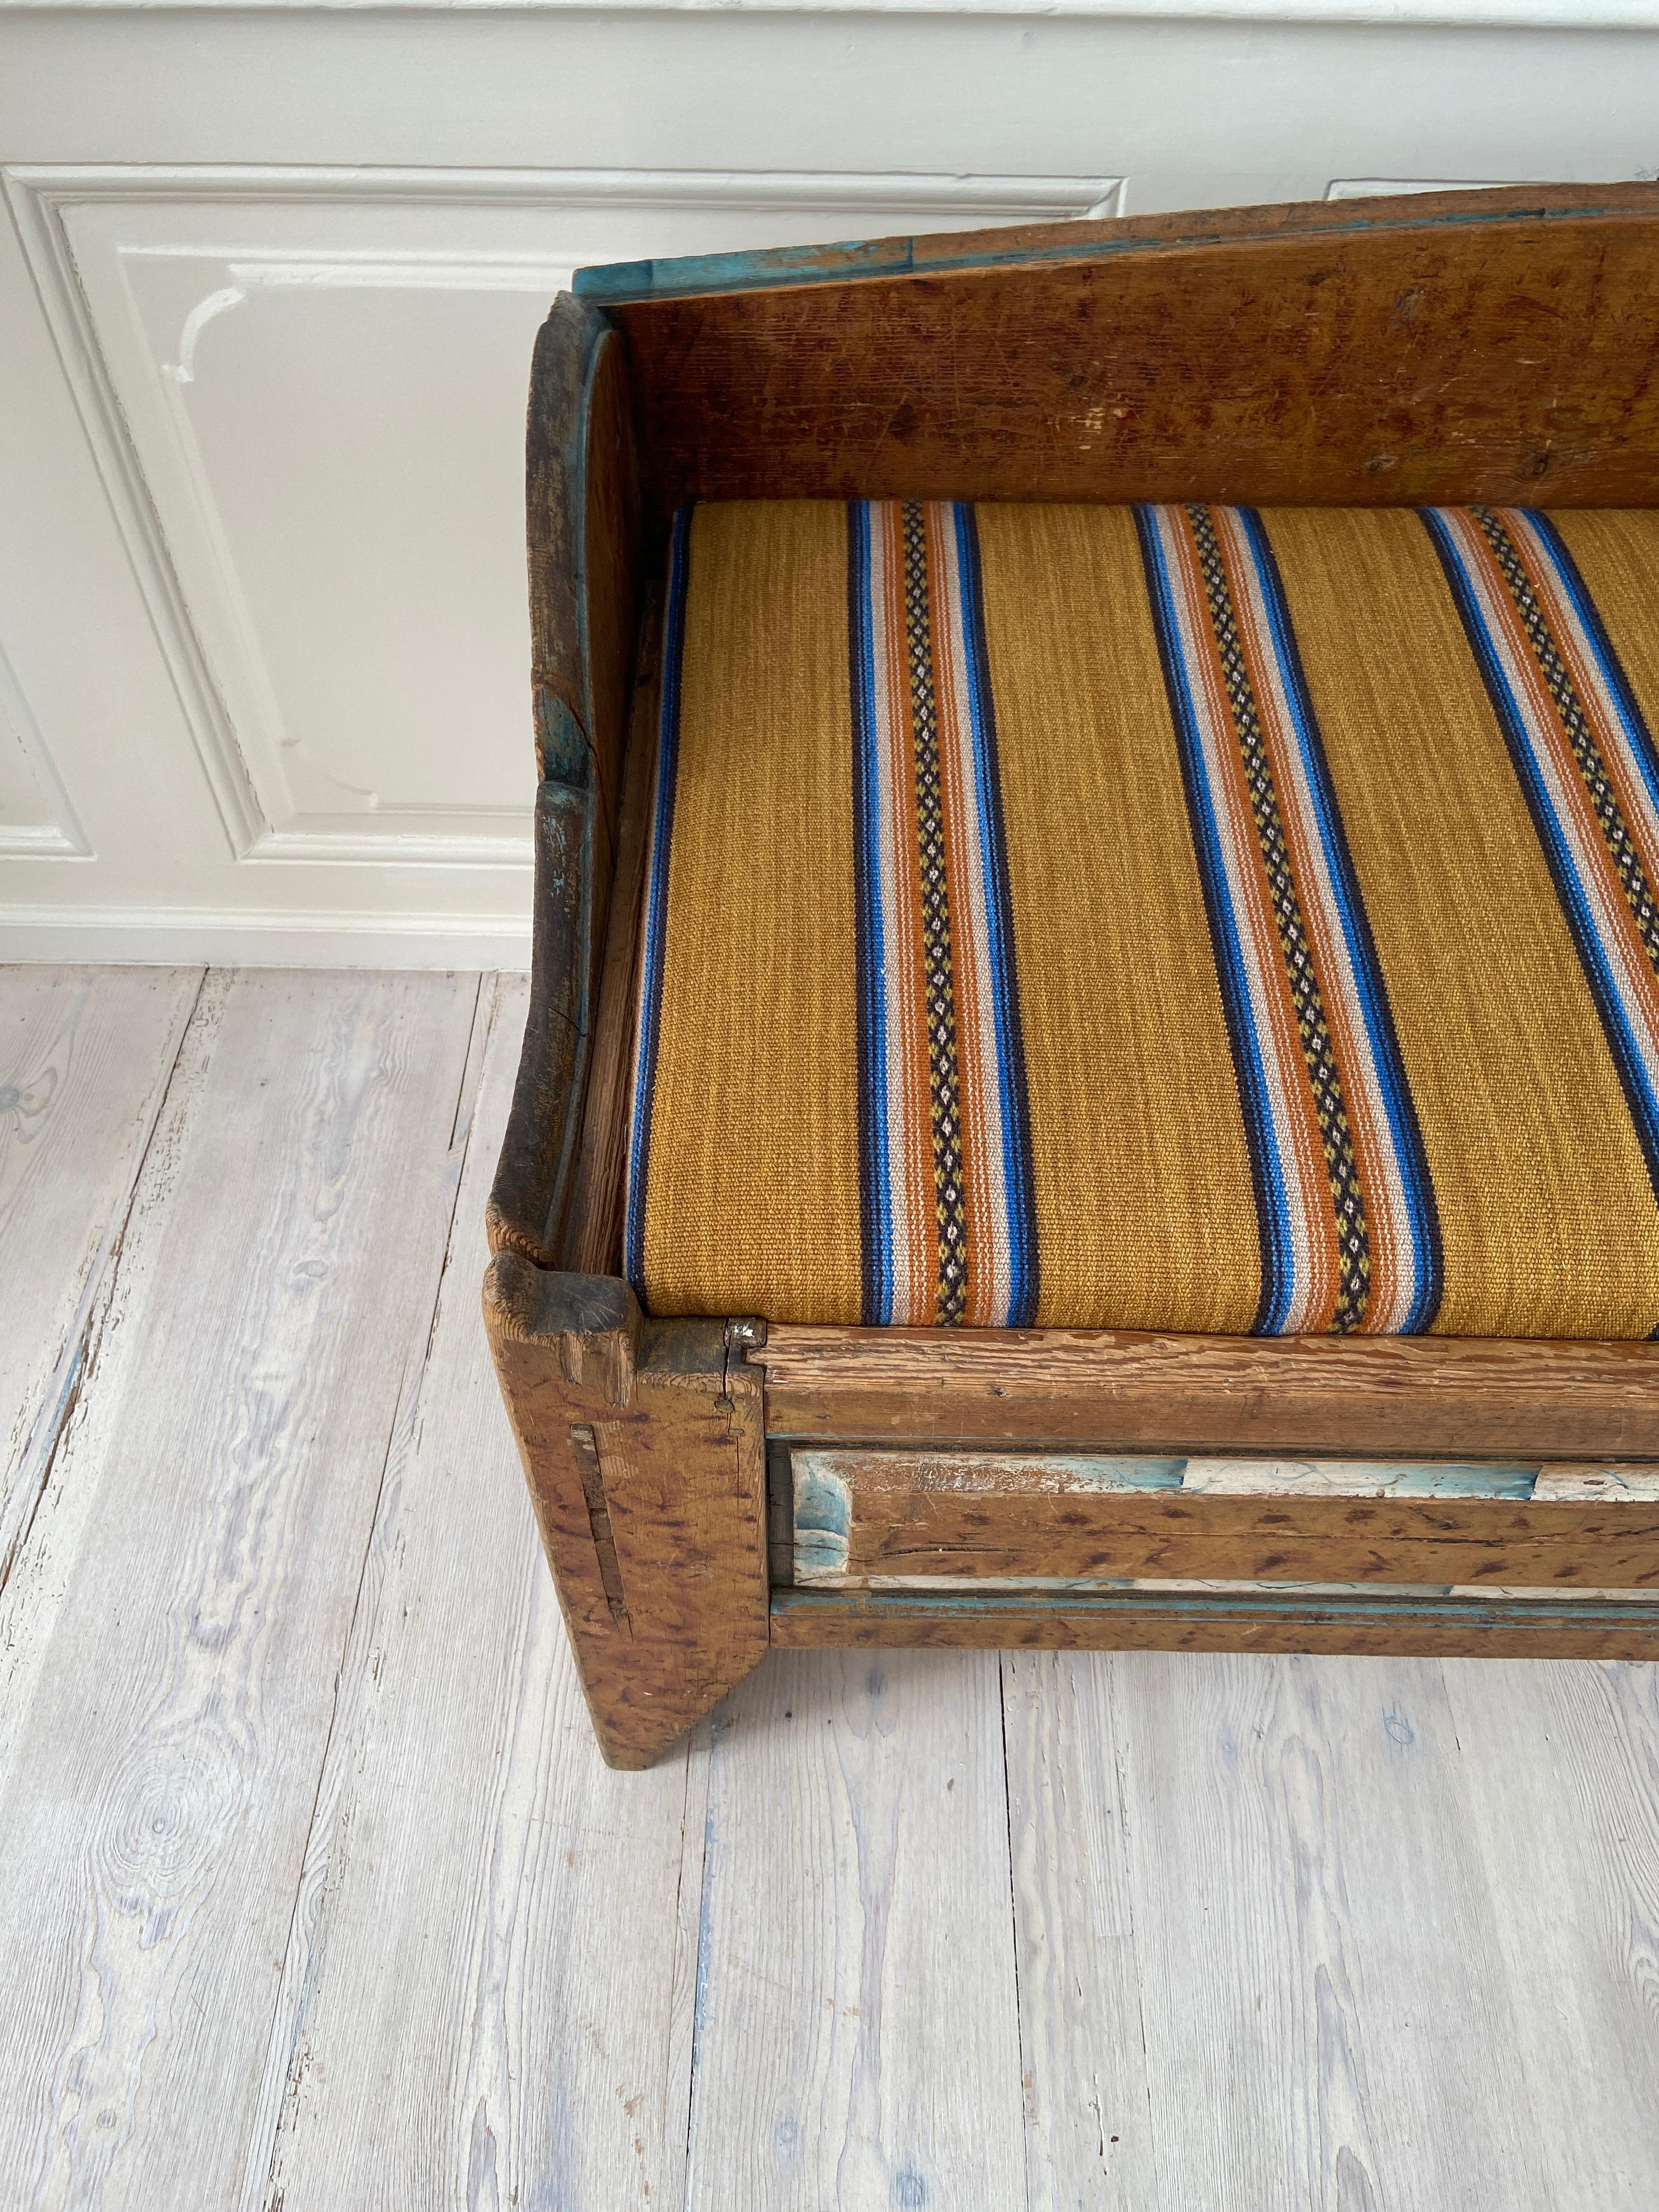 Swedish Antique Folk Art Bench In Pine With Upholstered Seat, Sweden Late 18th-Century